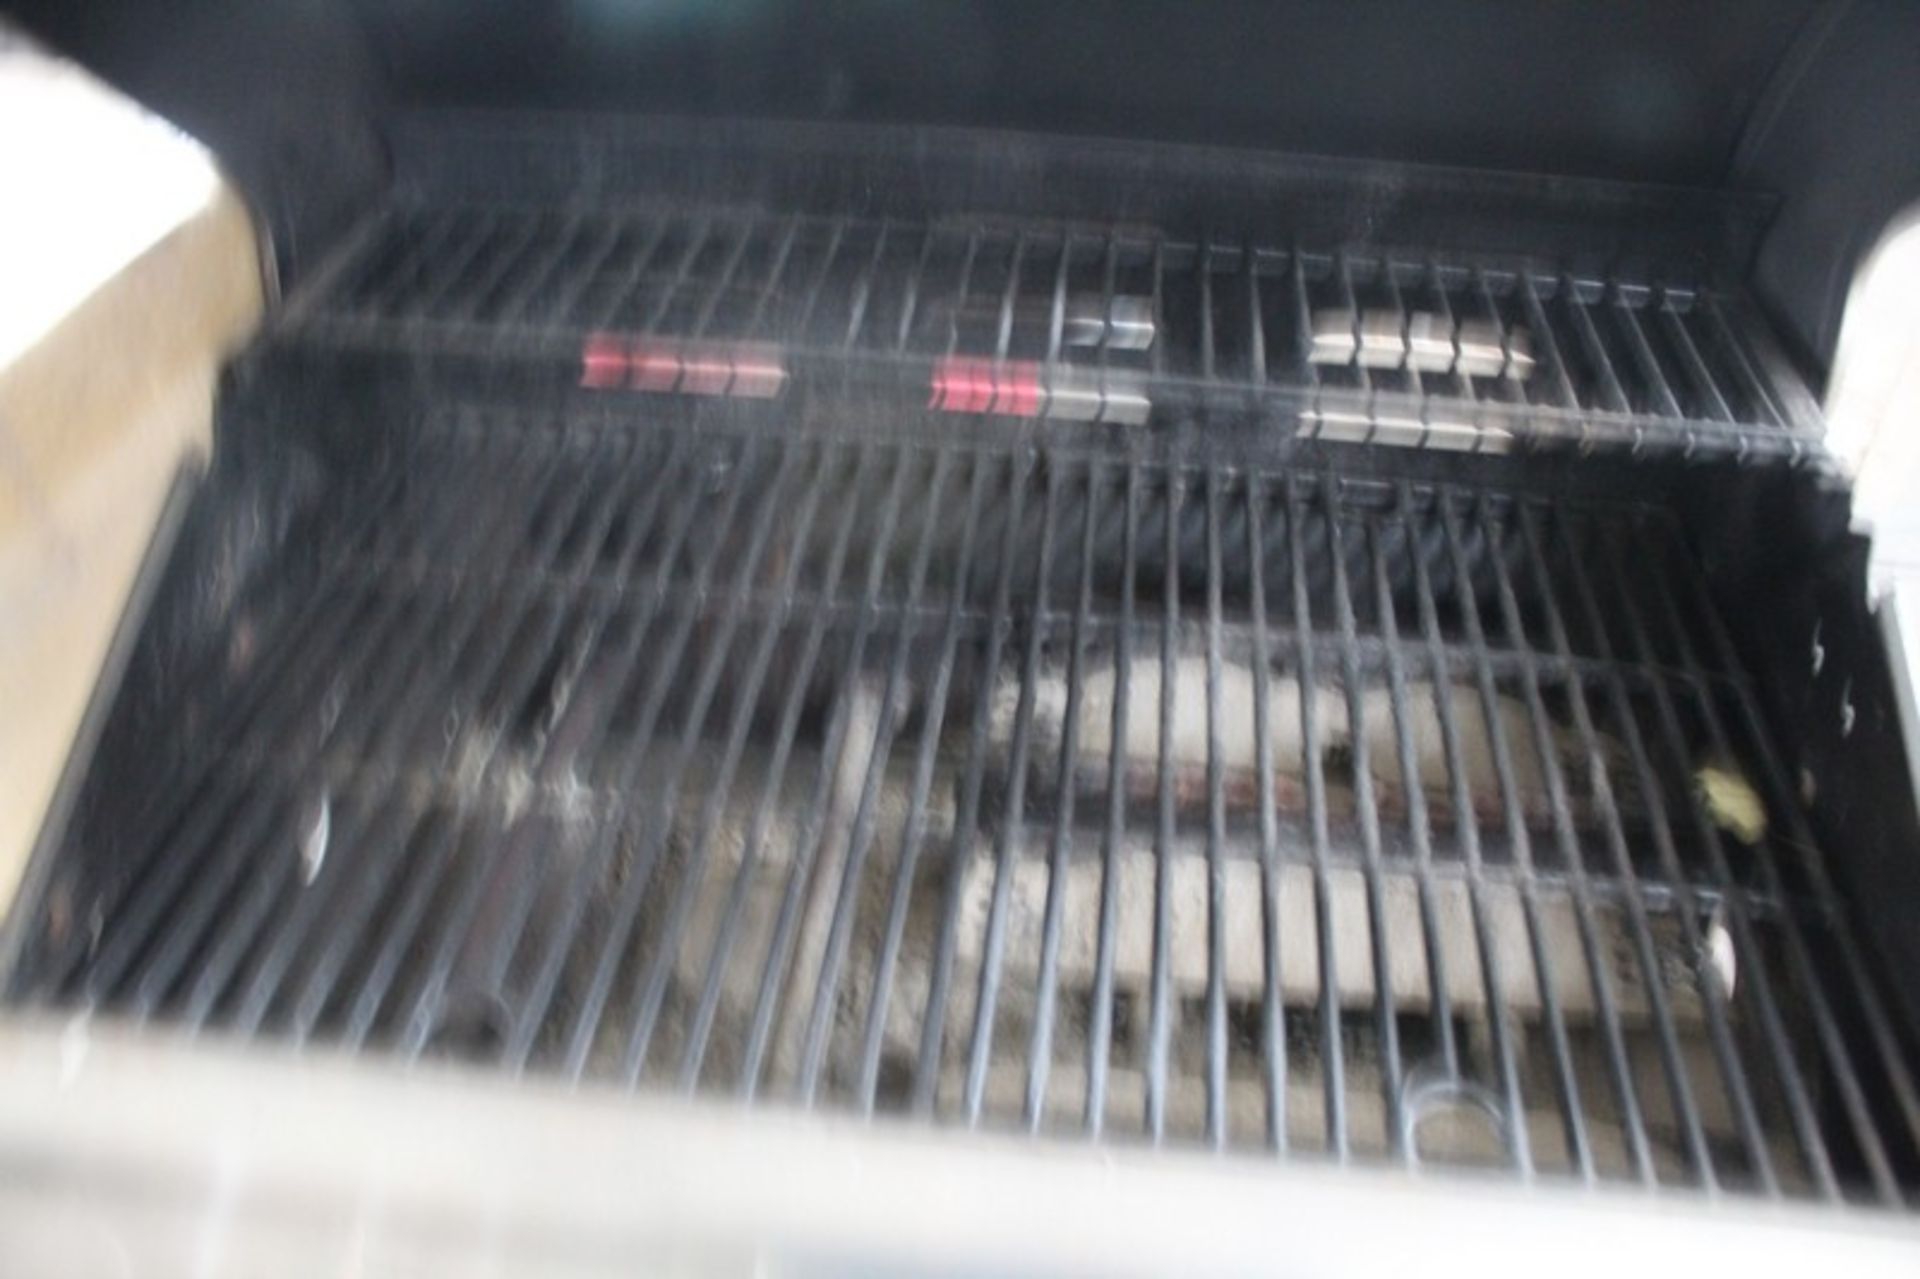 GRILLMASTER STAINLESS STEEL GRILL - Image 2 of 2